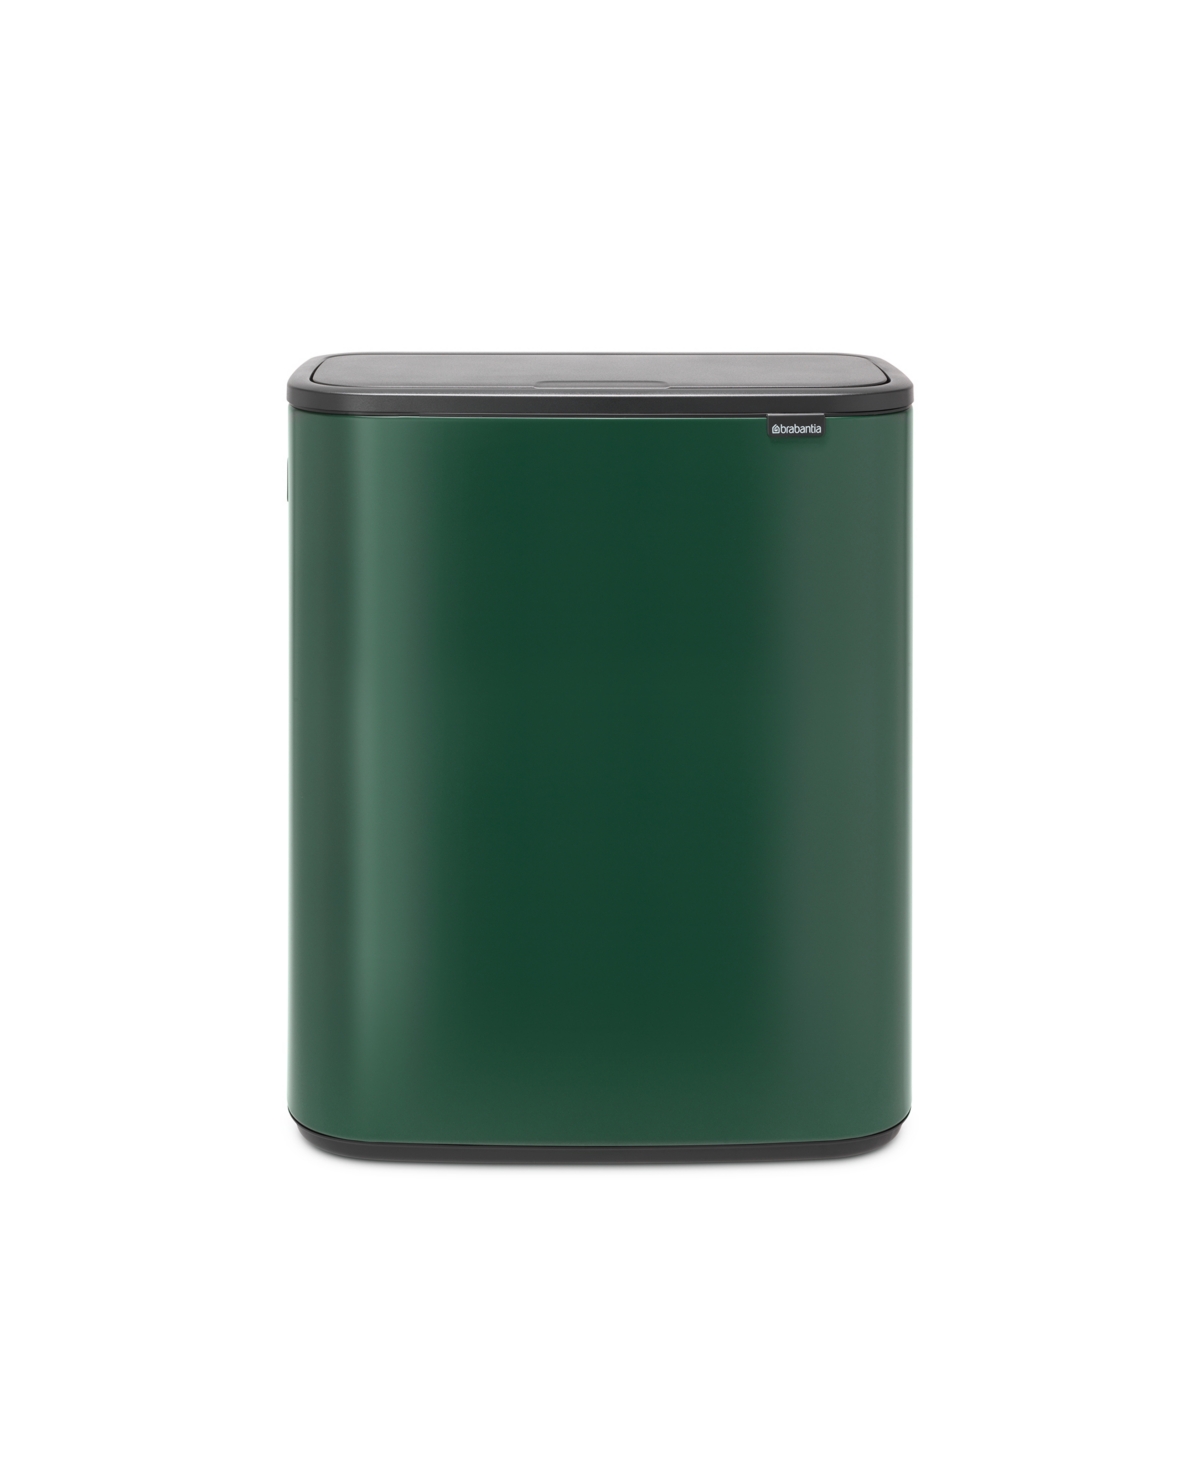 Bo Touch Top Dual Compartment Trash Can, 2 x 8 Gallon, 2 x 30 Liter - Pine Green